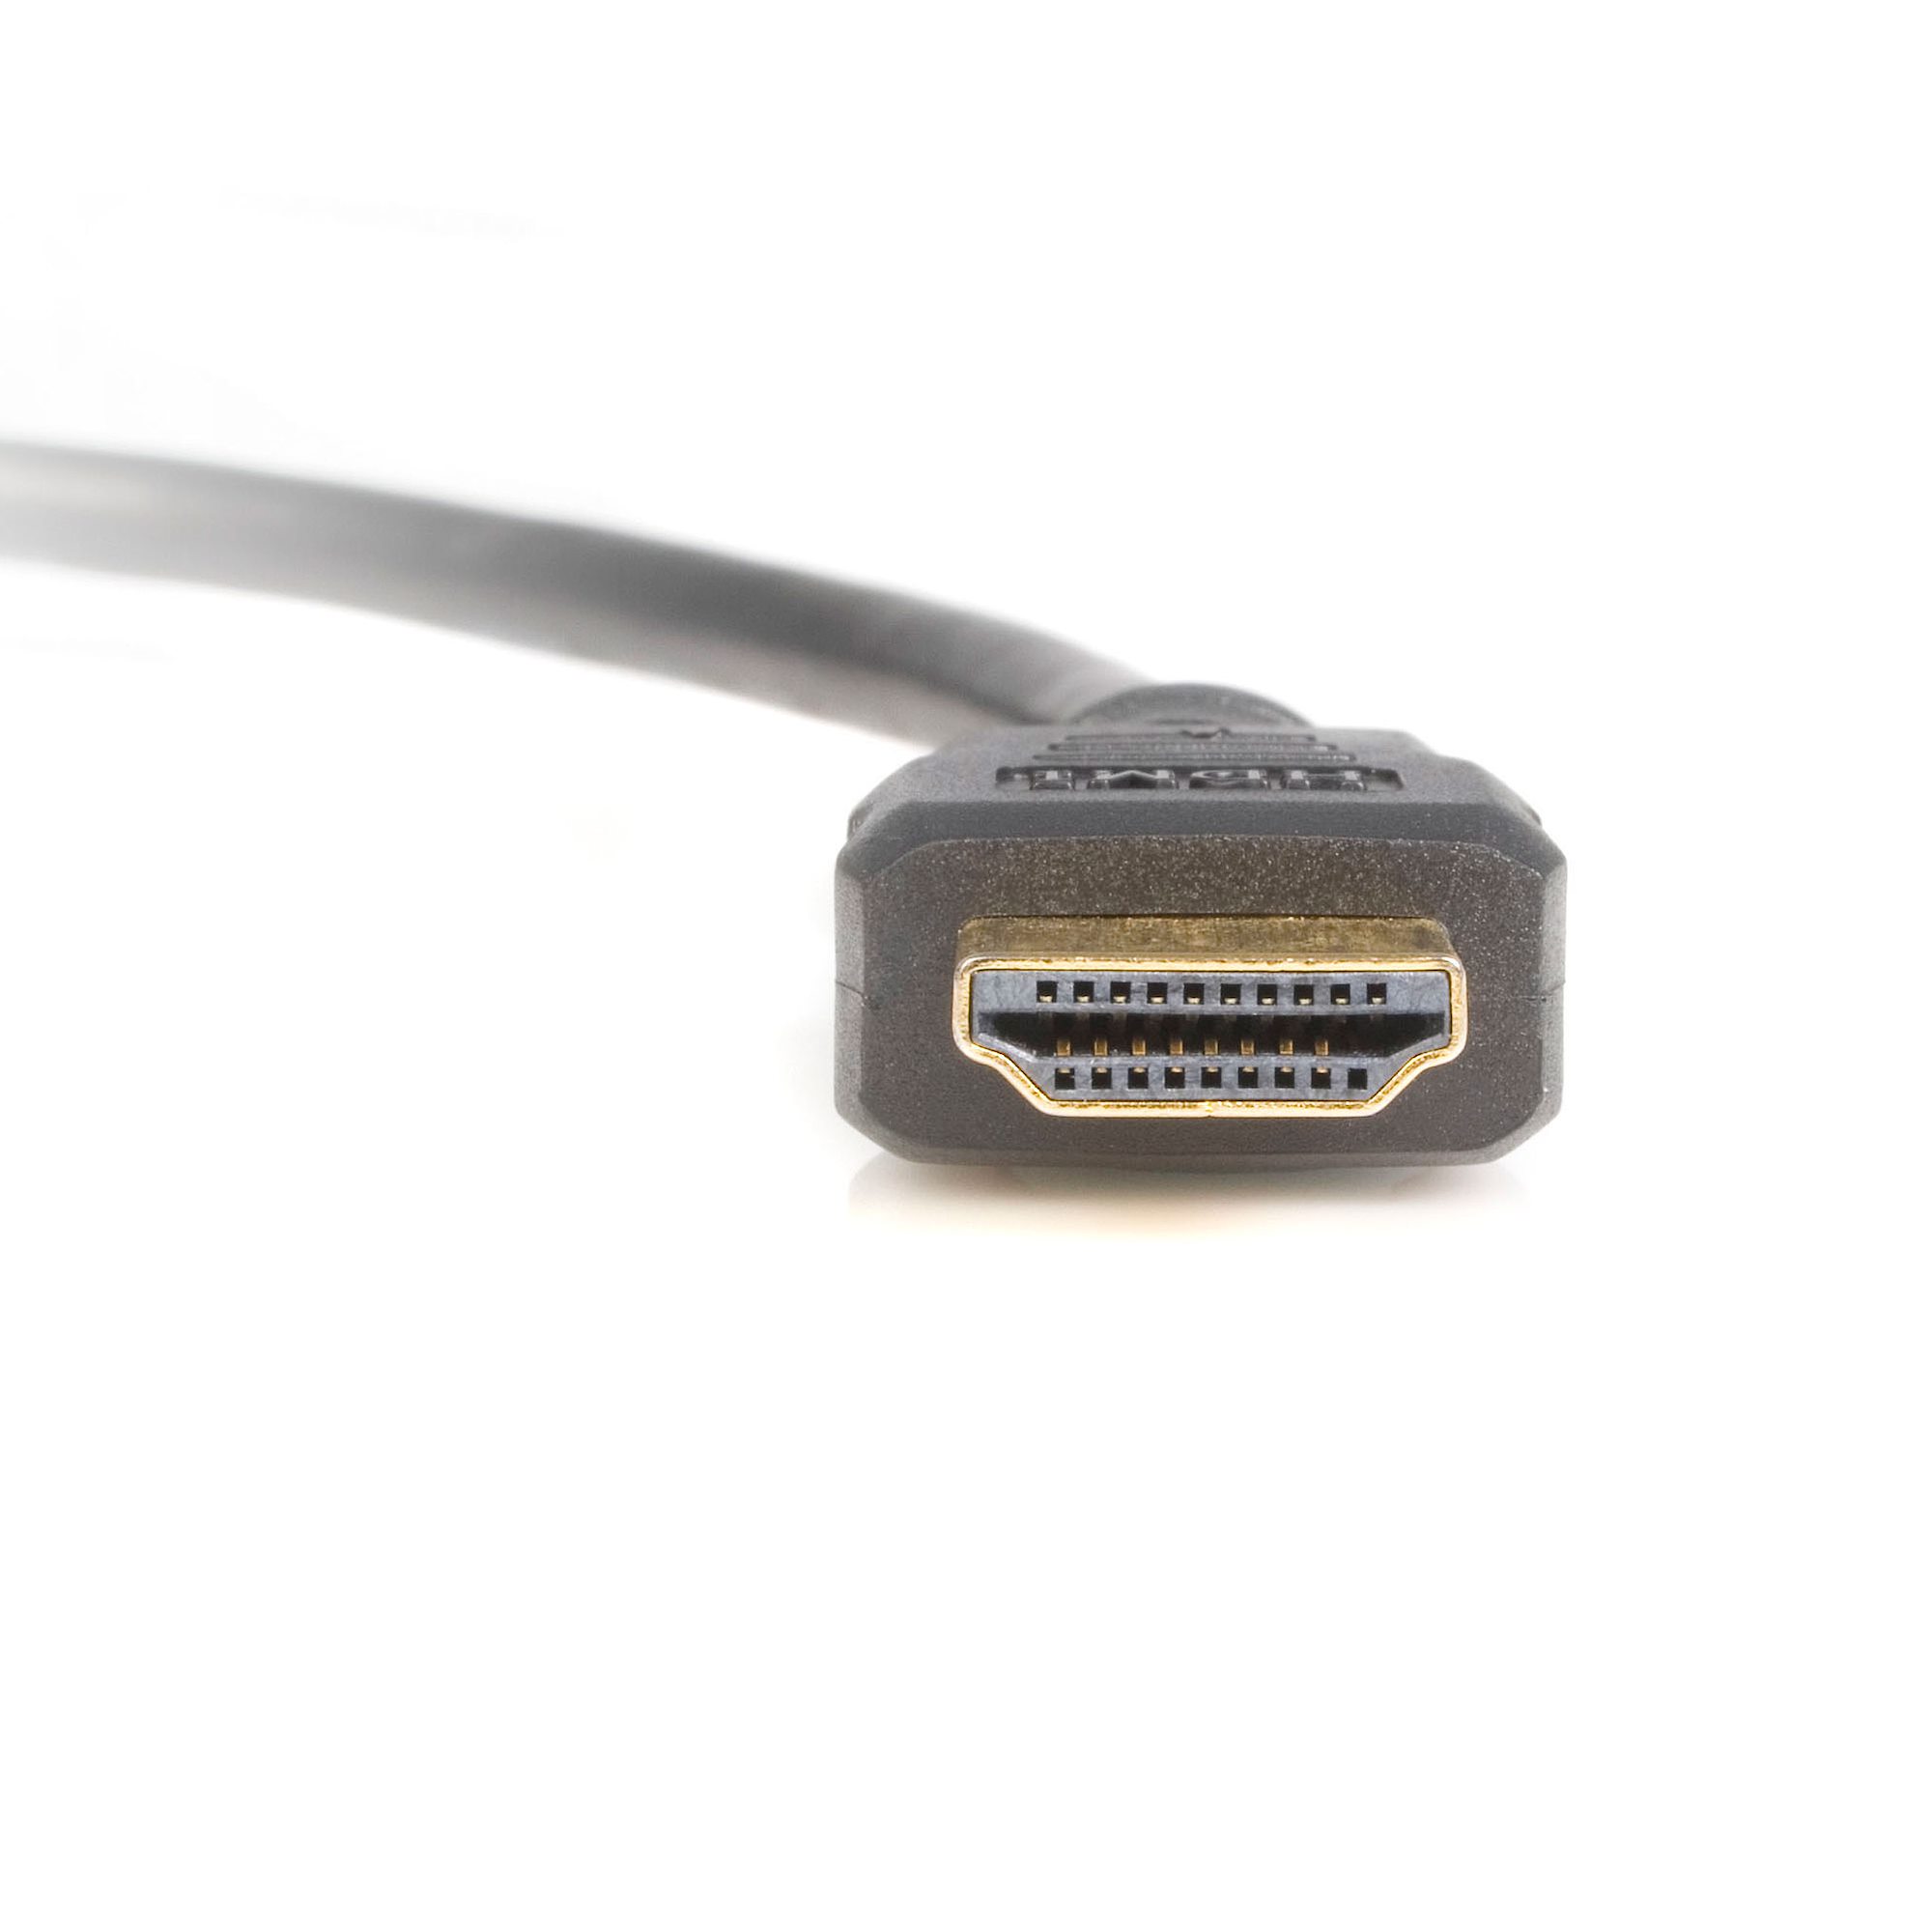 1ft HDMI Splitter Cable HDMI to 2x DVI-D - HDMI® Cables & HDMI Adapters